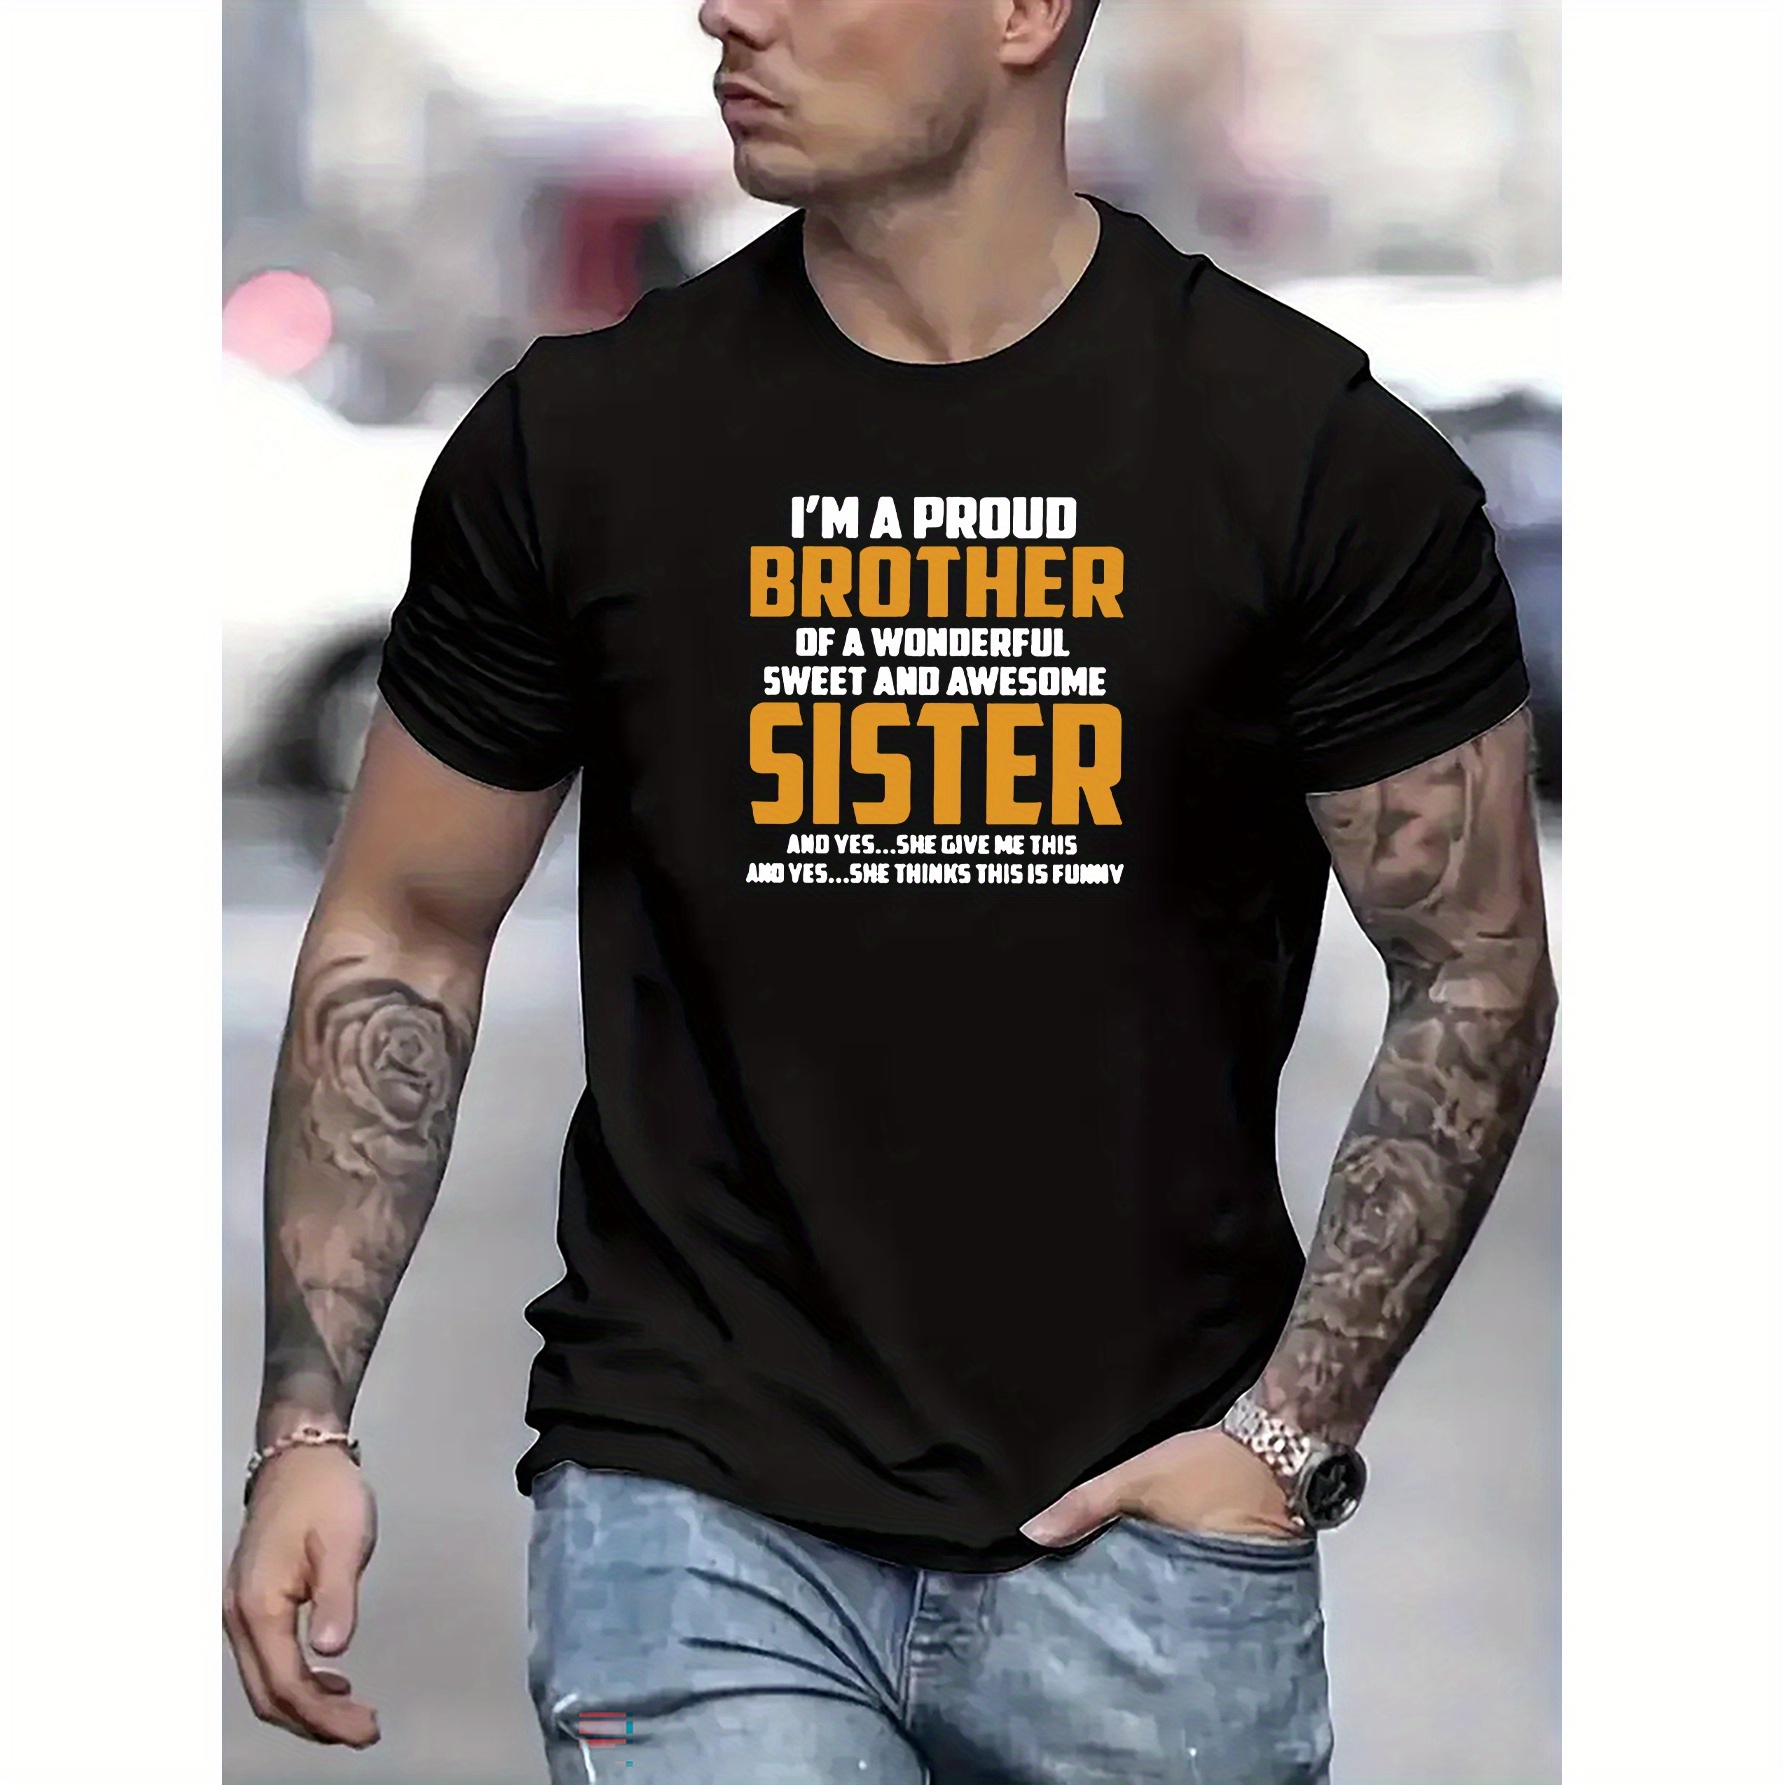 

Proud Brother Print T Shirt, Tees For Men, Casual Short Sleeve T-shirt For Summer